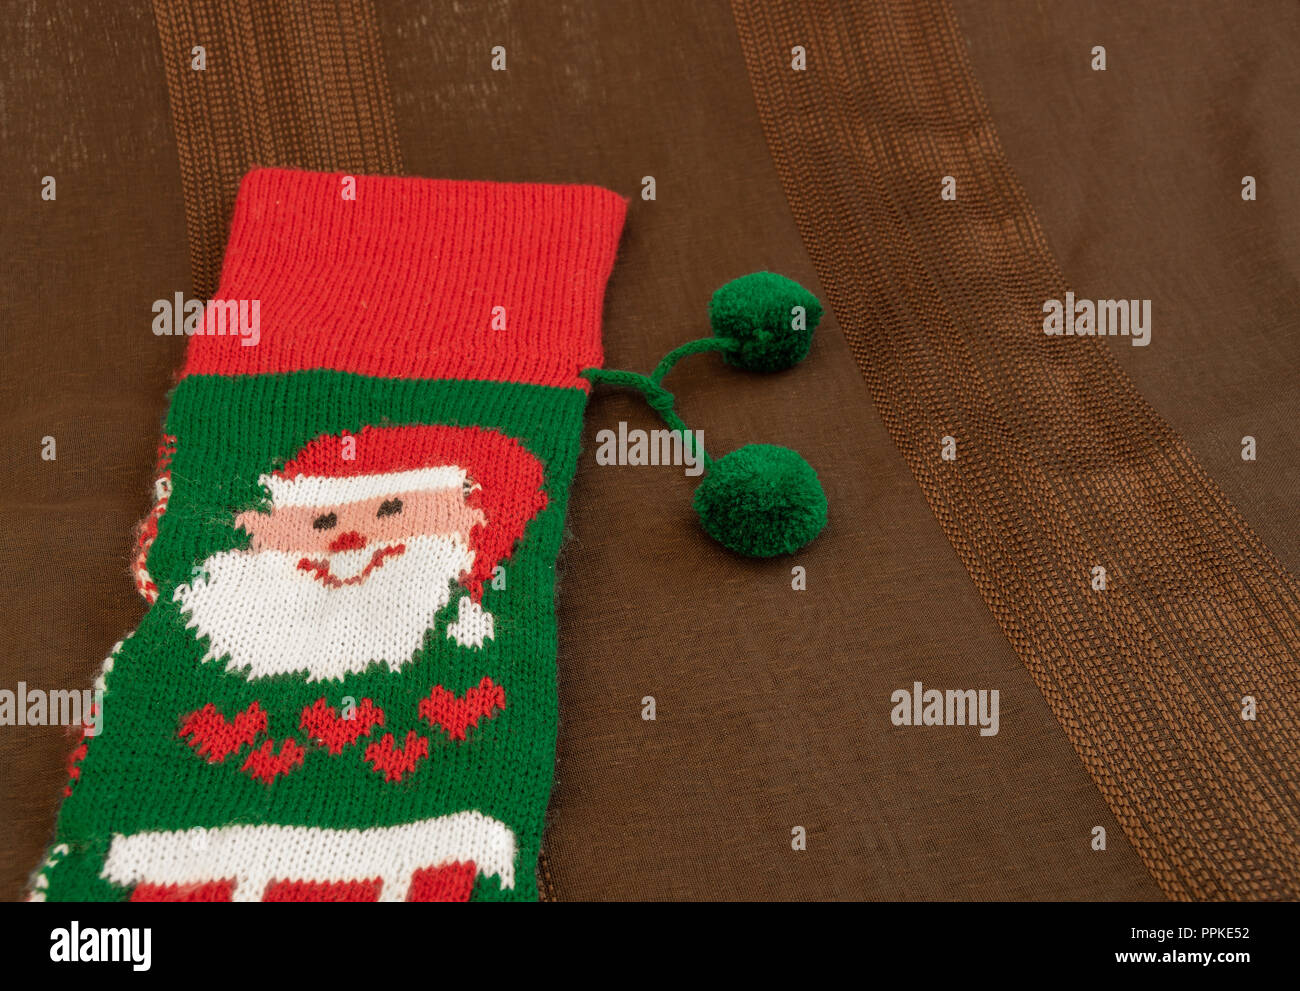 Colorful christmas sock with drawing of Santa Claus to fill with gifts. Sock with decoration and christmas motifs, traditional in these holidays. Stock Photo